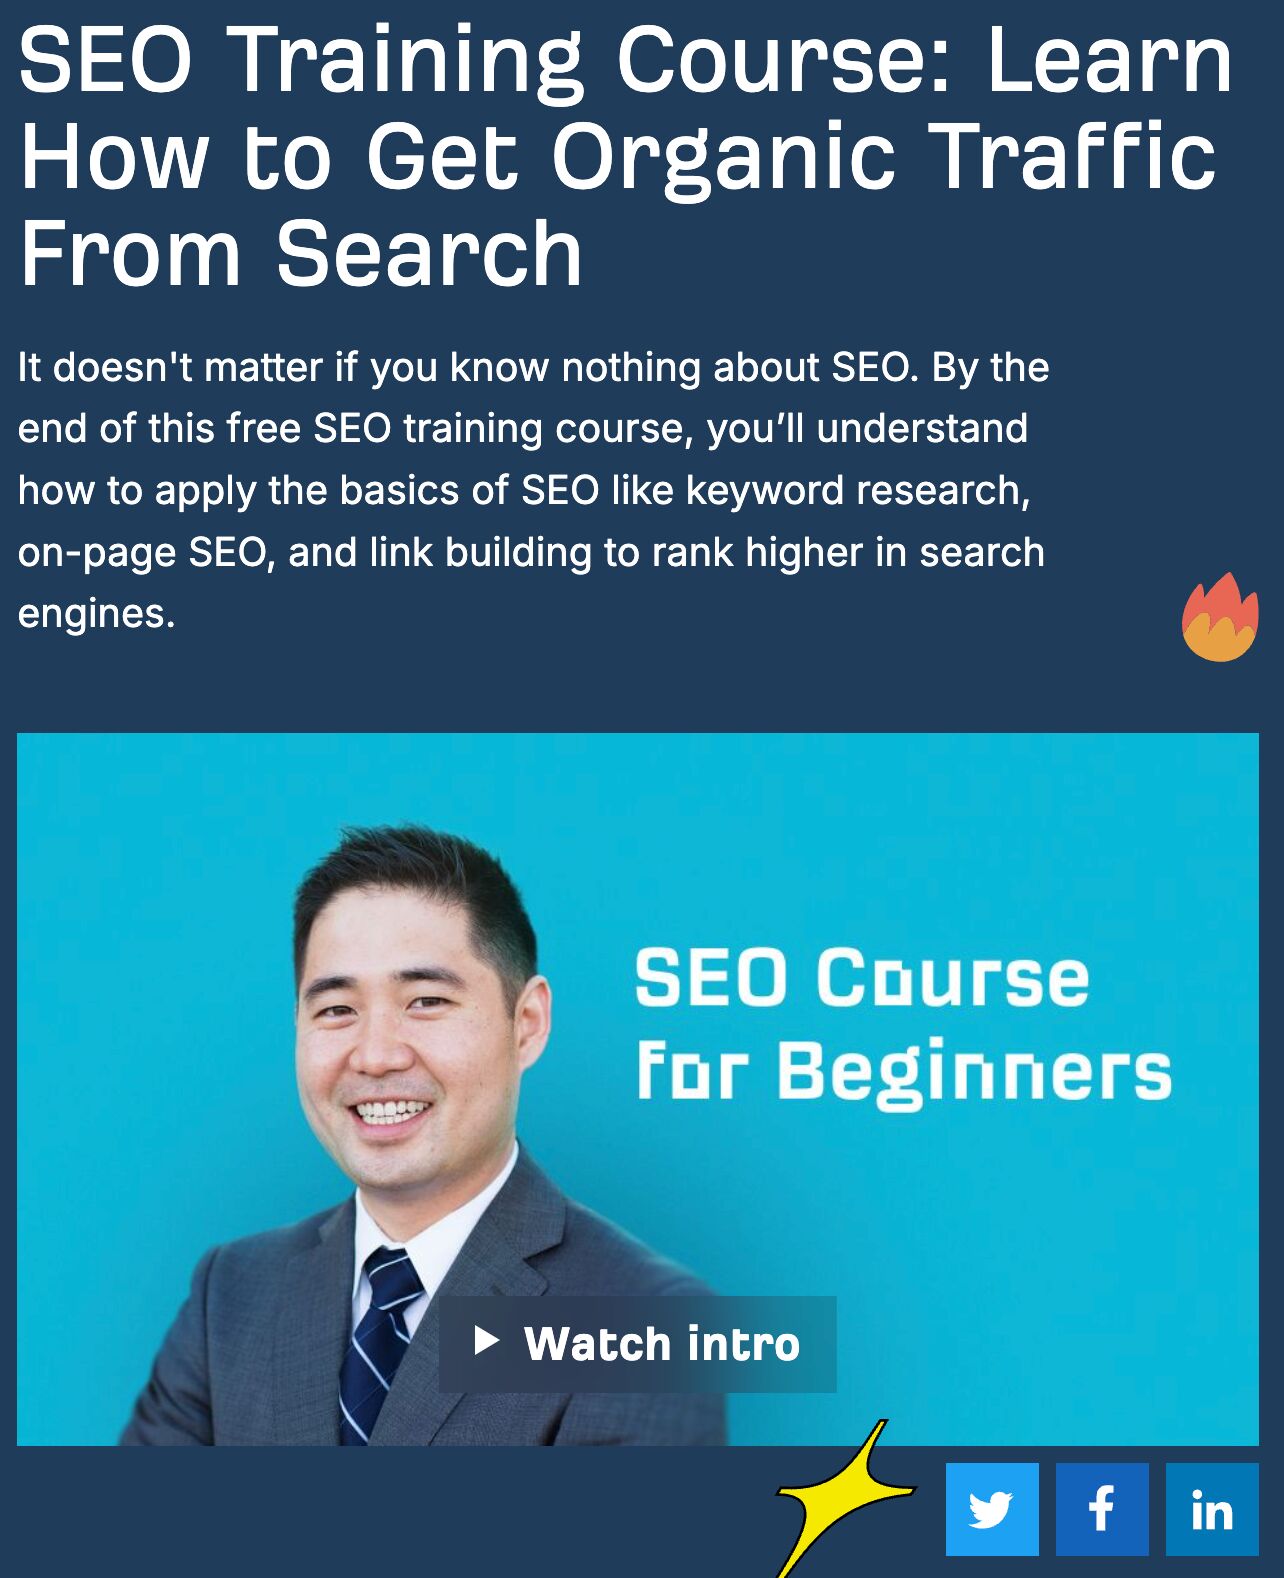 SEO Course for Beginners by Ahrefs